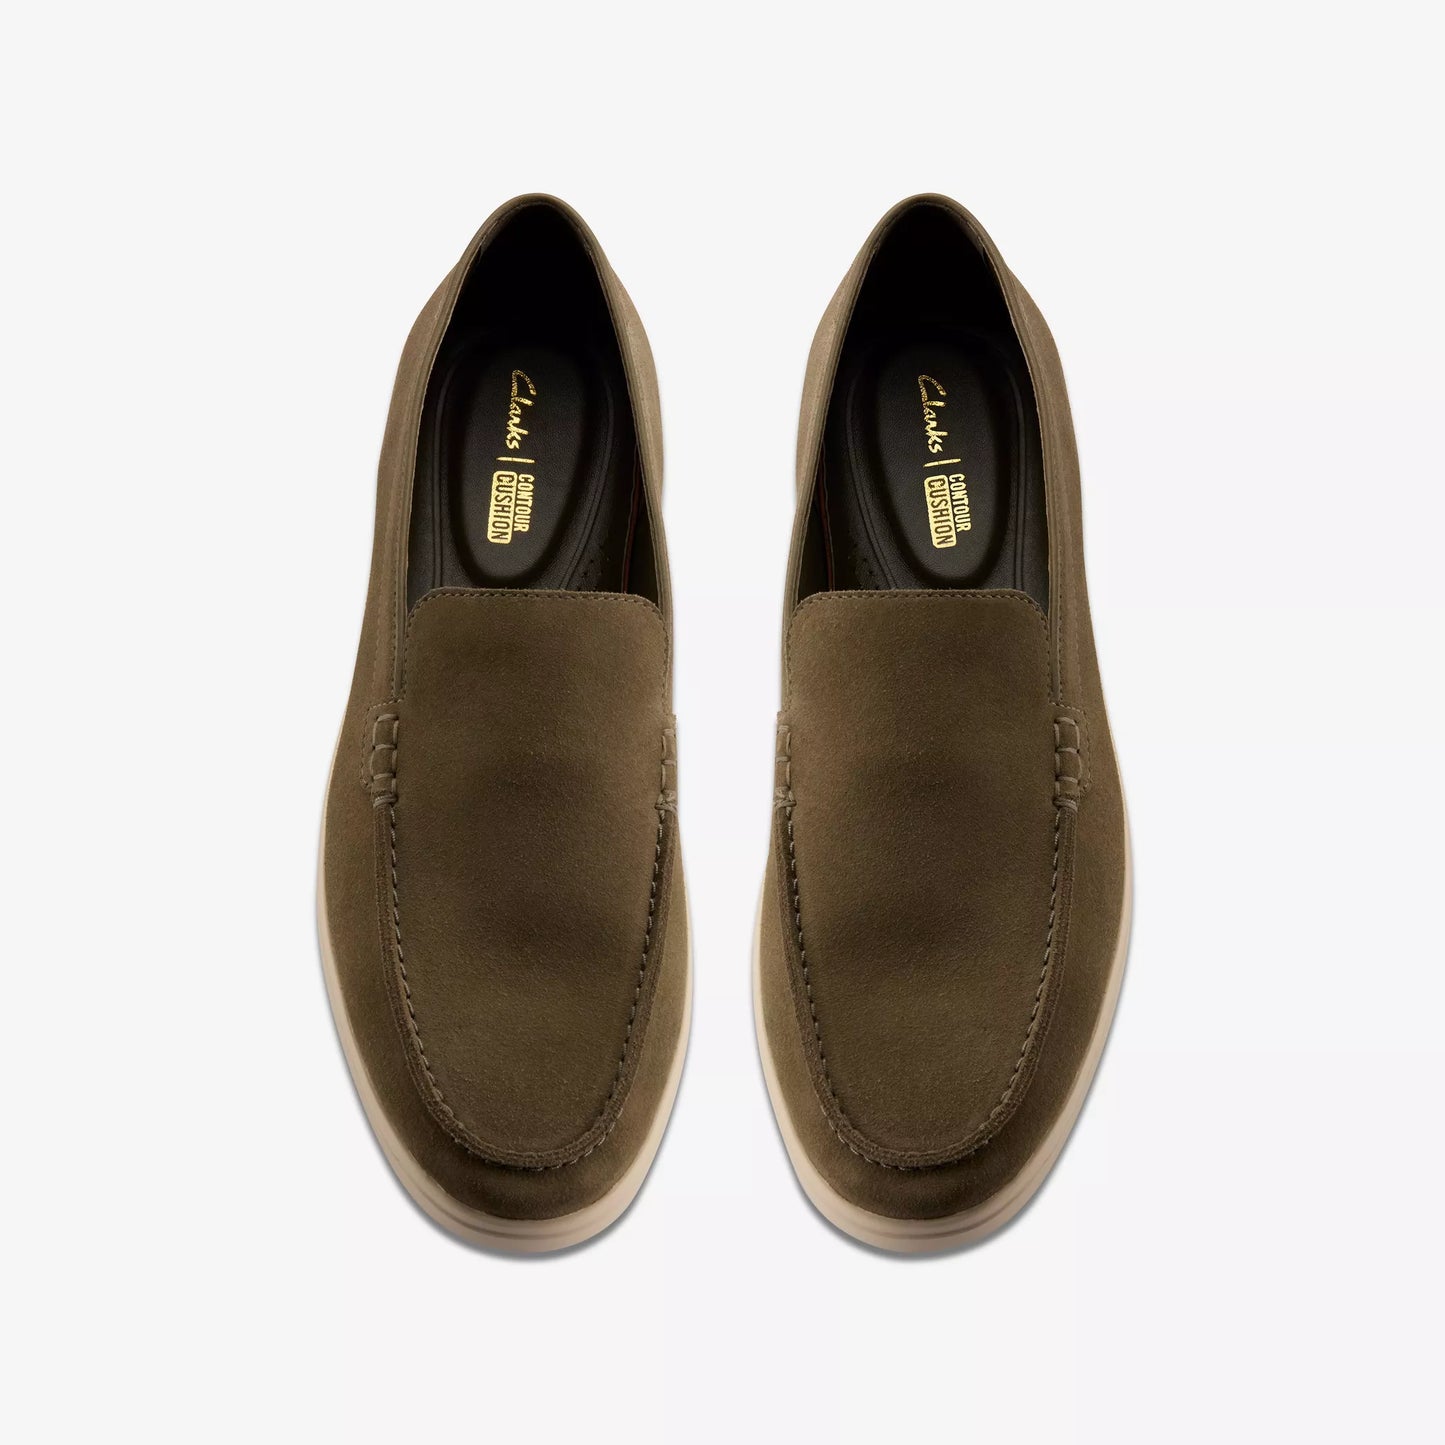 CLARKS | CHAUSSURES DÉCONTRACTÉES POUR HOMMES | TORFORD EASY OLIVE SUEDE | VERT